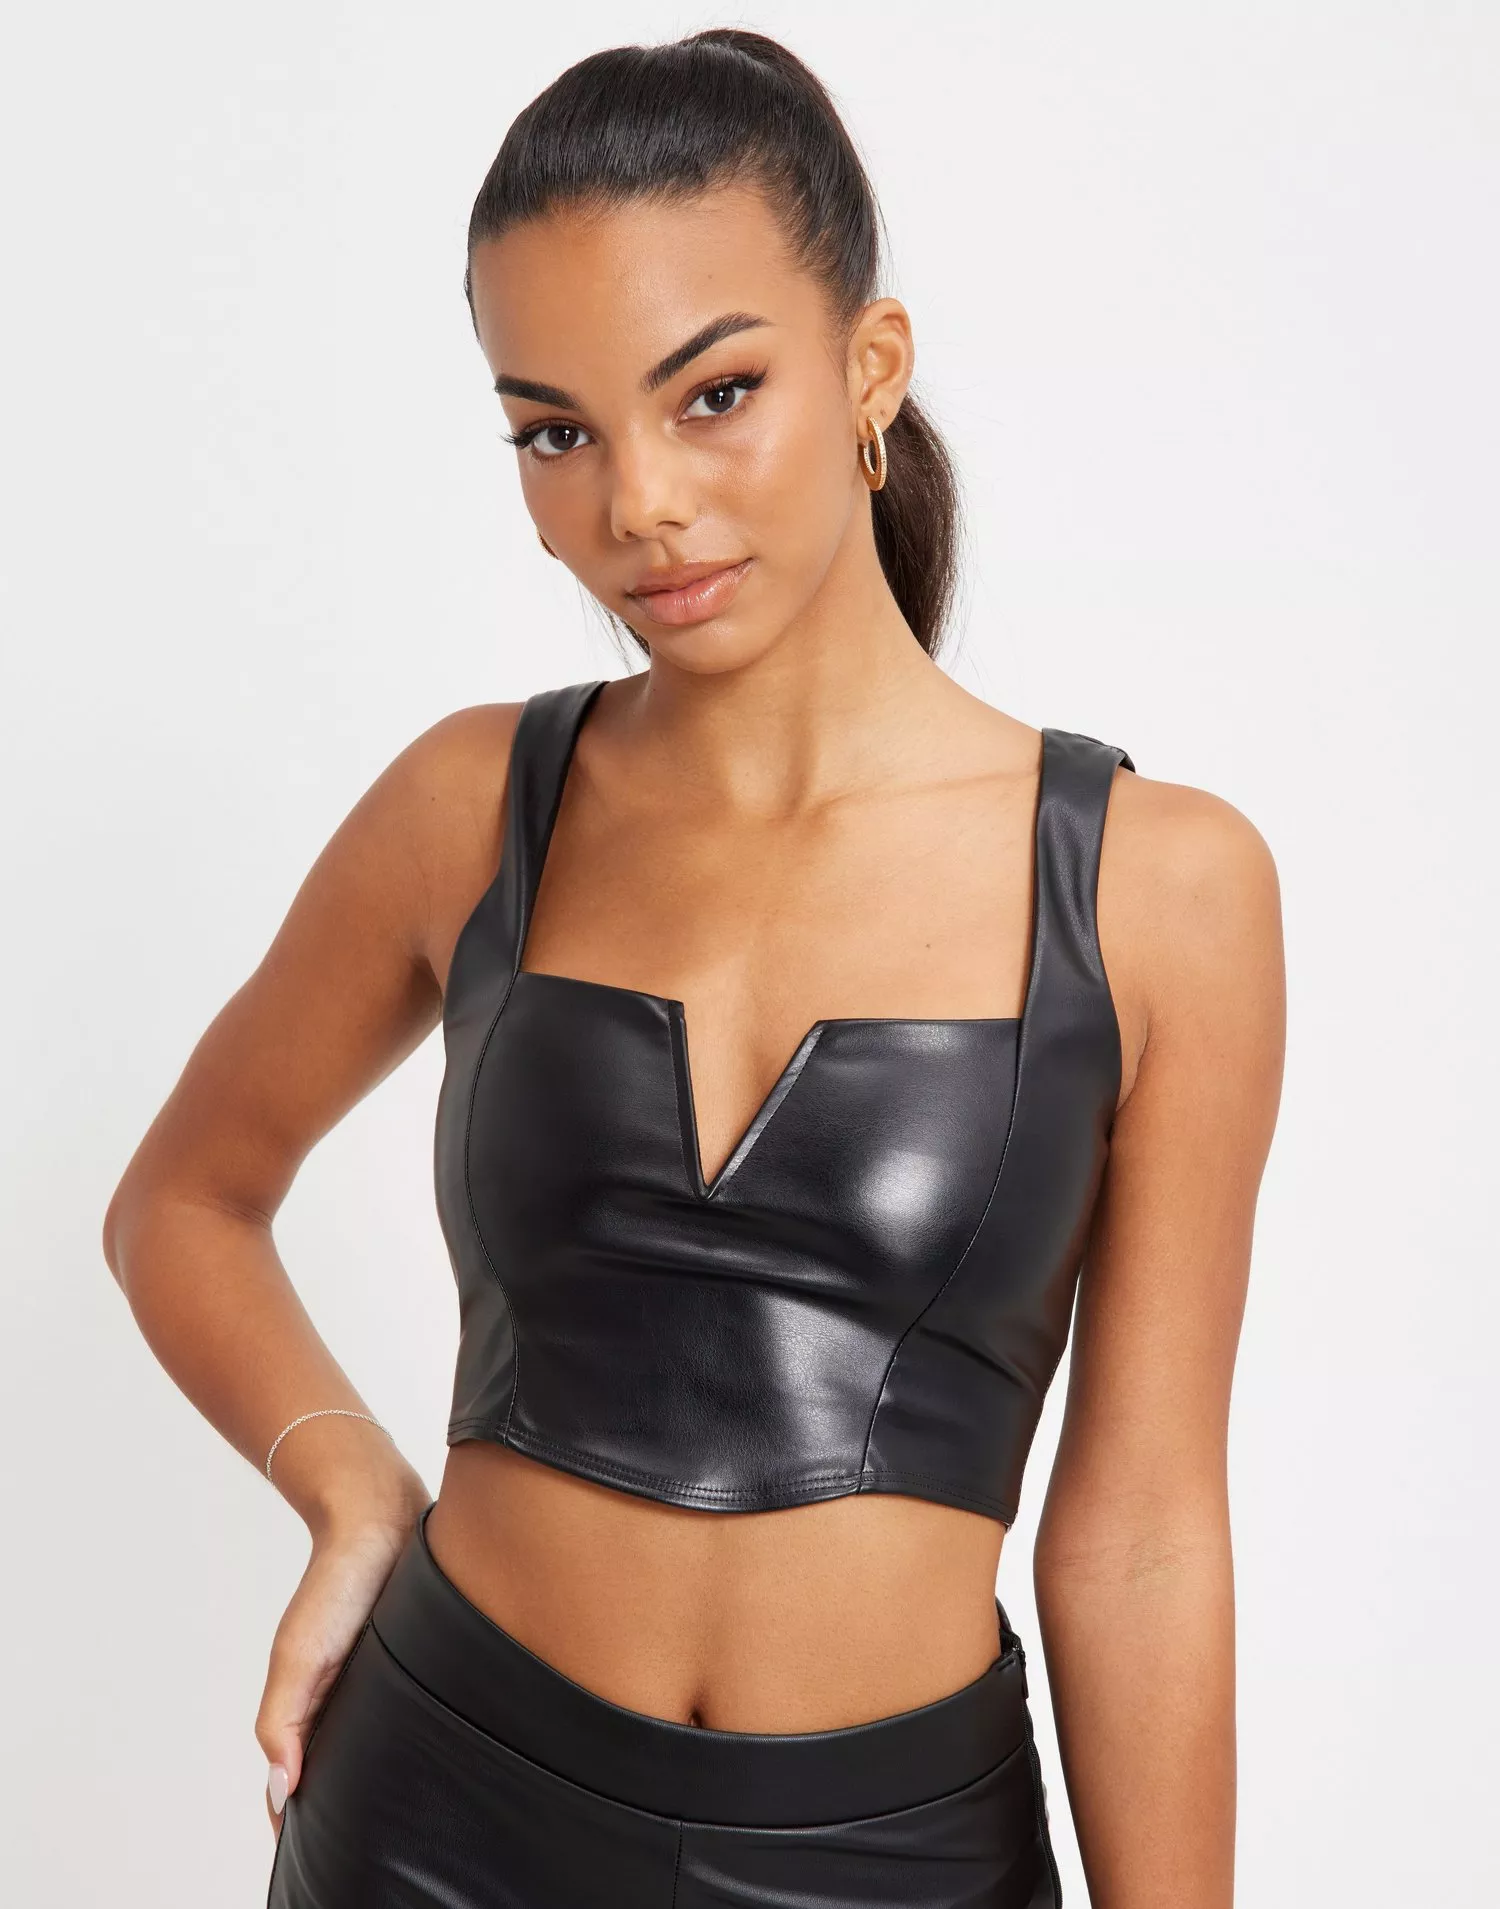 Peck æggelederne Blitz Buy Nelly Leather Look Wire Top - Black | Nelly.com